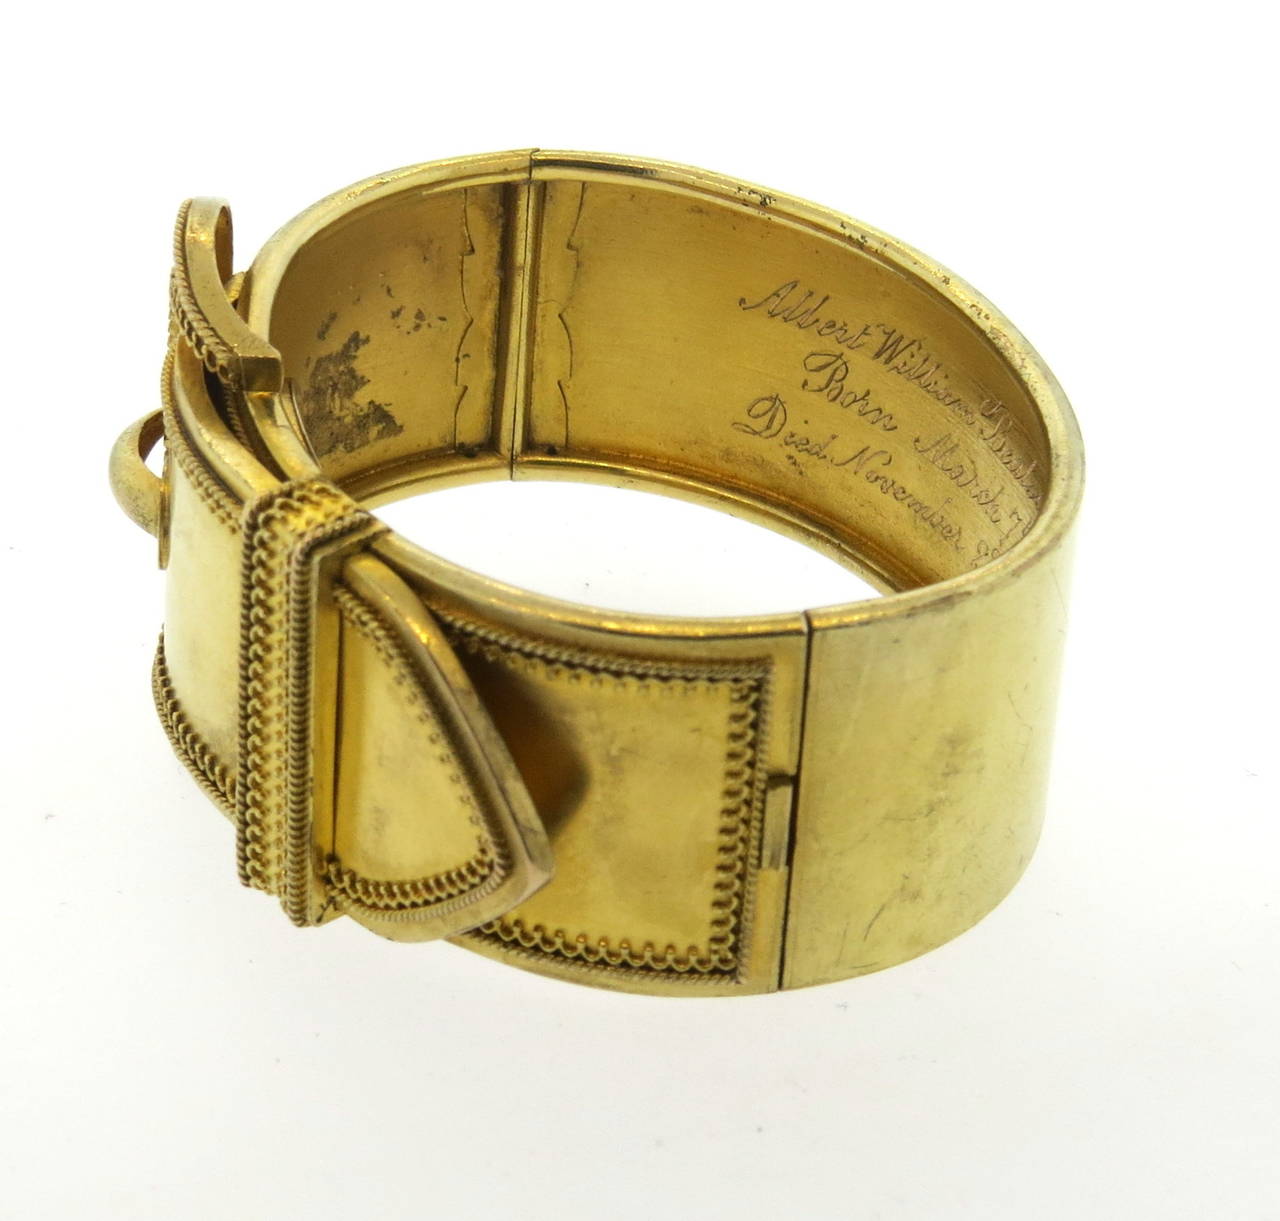 Antique circa 1870s 14k gold bangle, featuring buckle design. Bracelet will fit up to 6 1/2